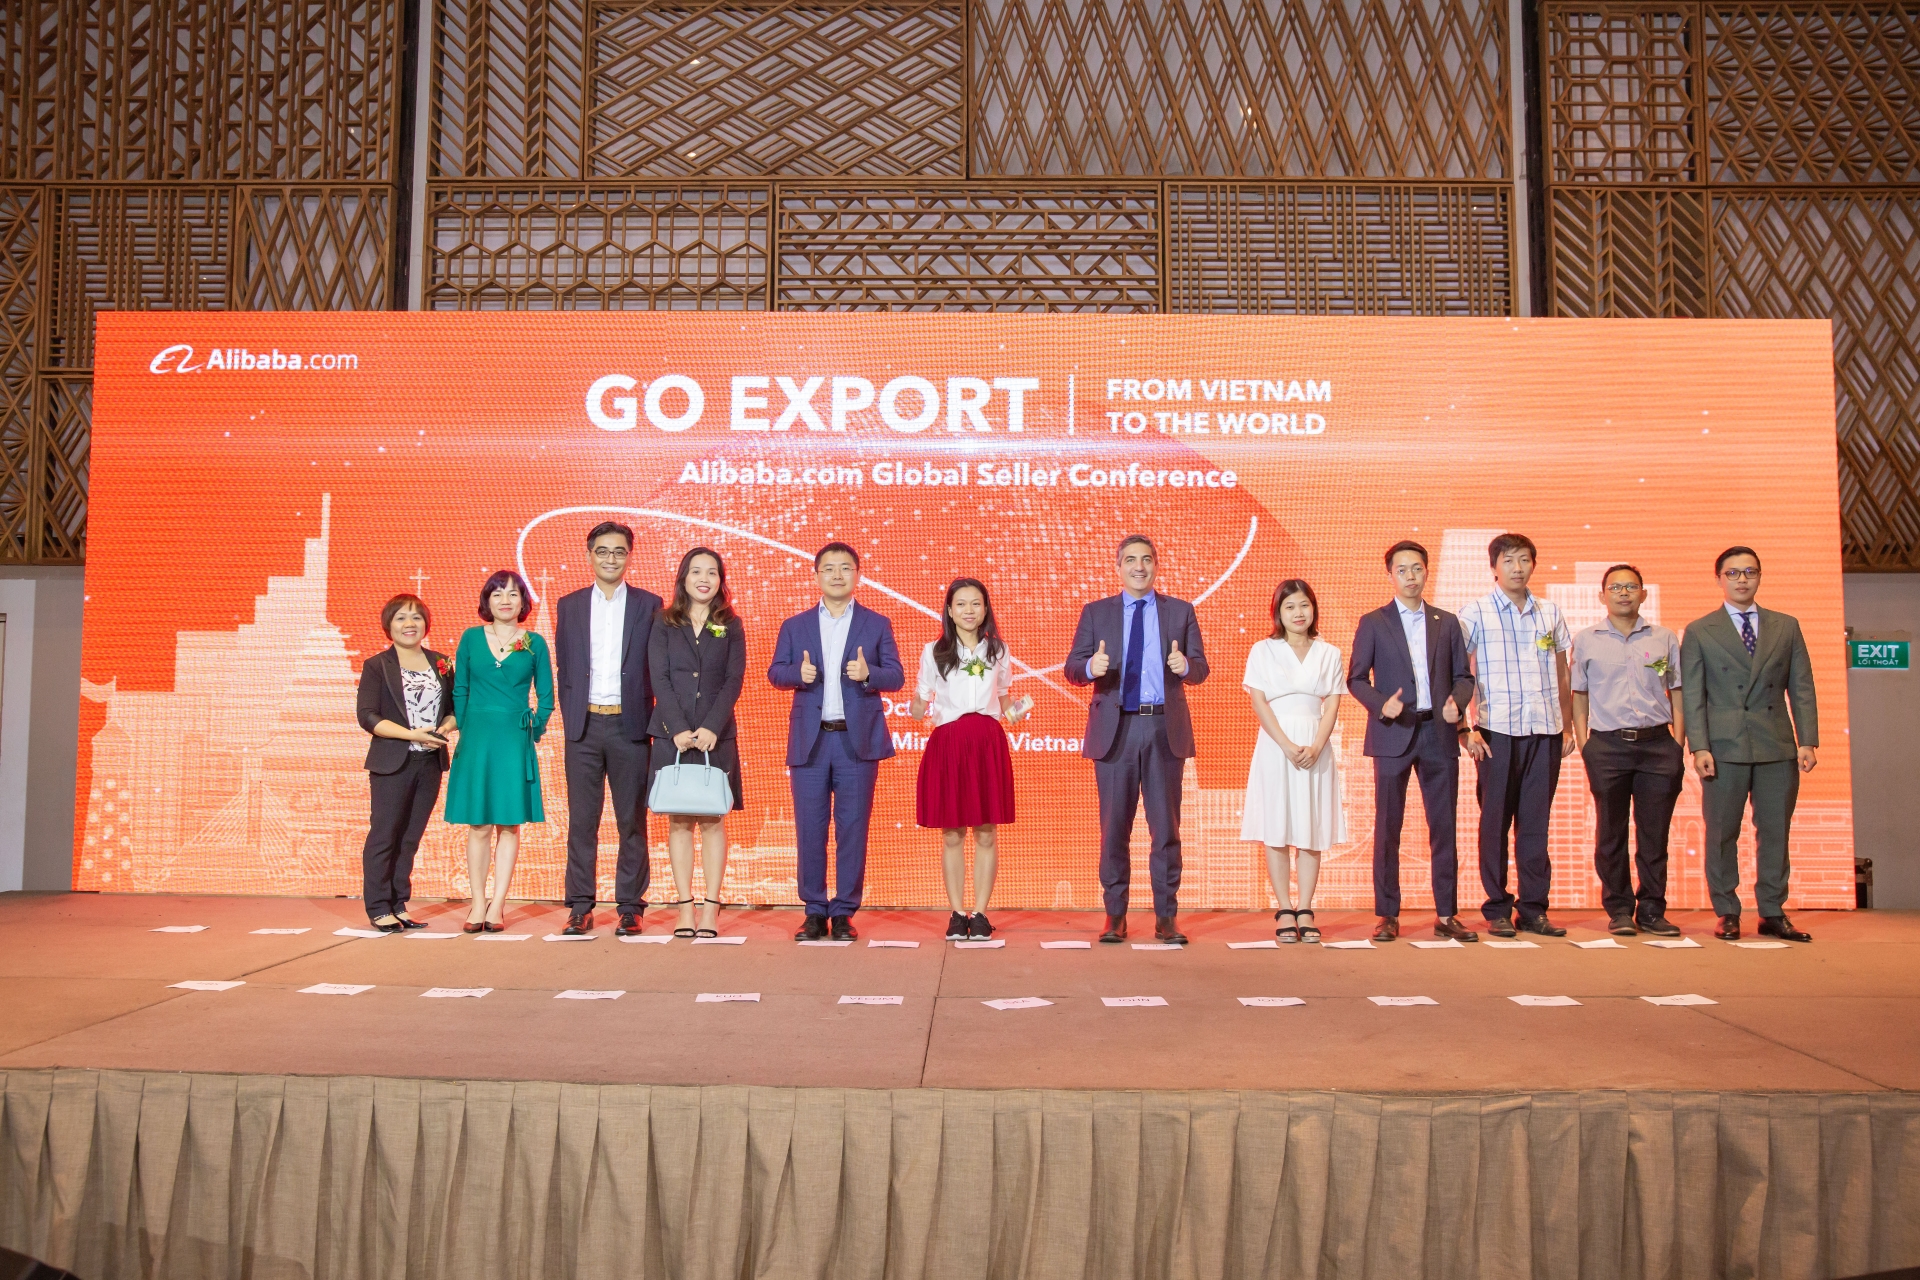 Alibaba.com gives wing to Vietnamese SMEs to go global